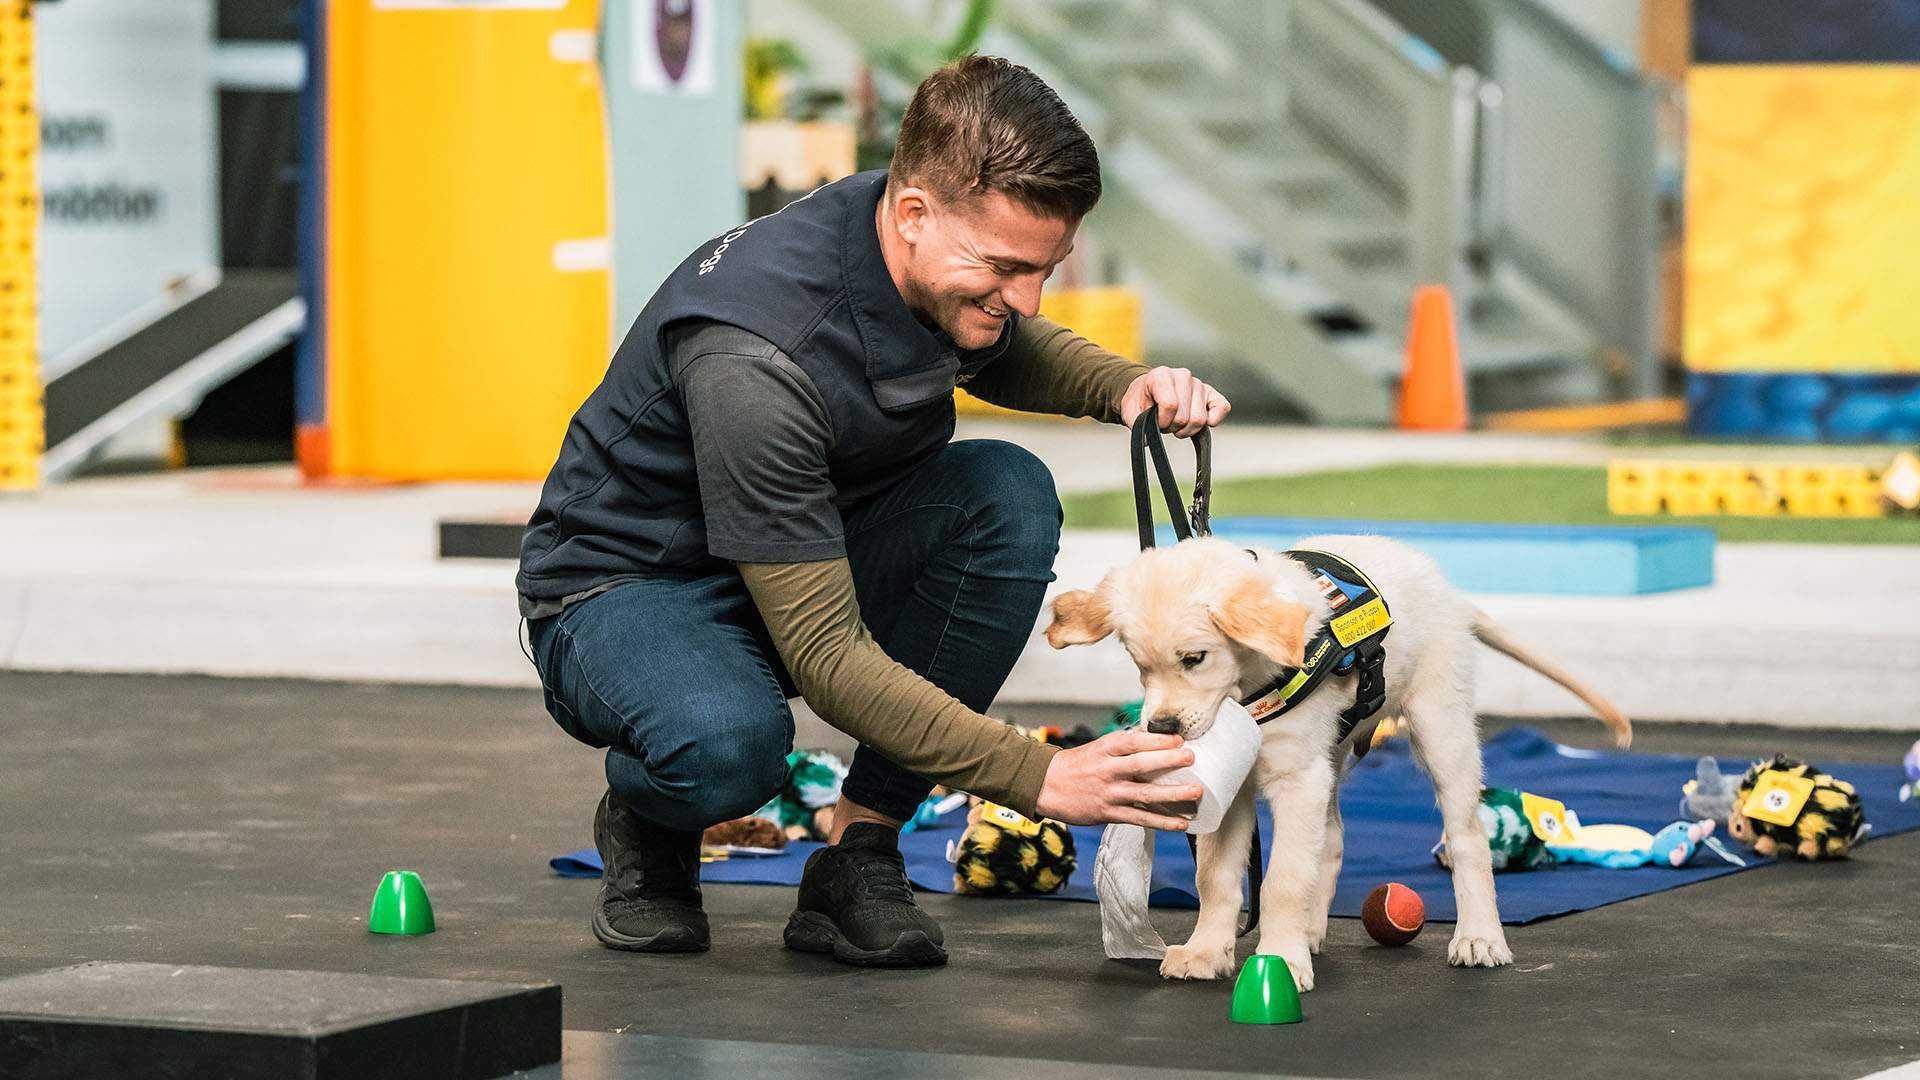 Vision Australia Is Bringing Back Its Adorable Seeing Eye Dogs Puppy Games for the Third Year